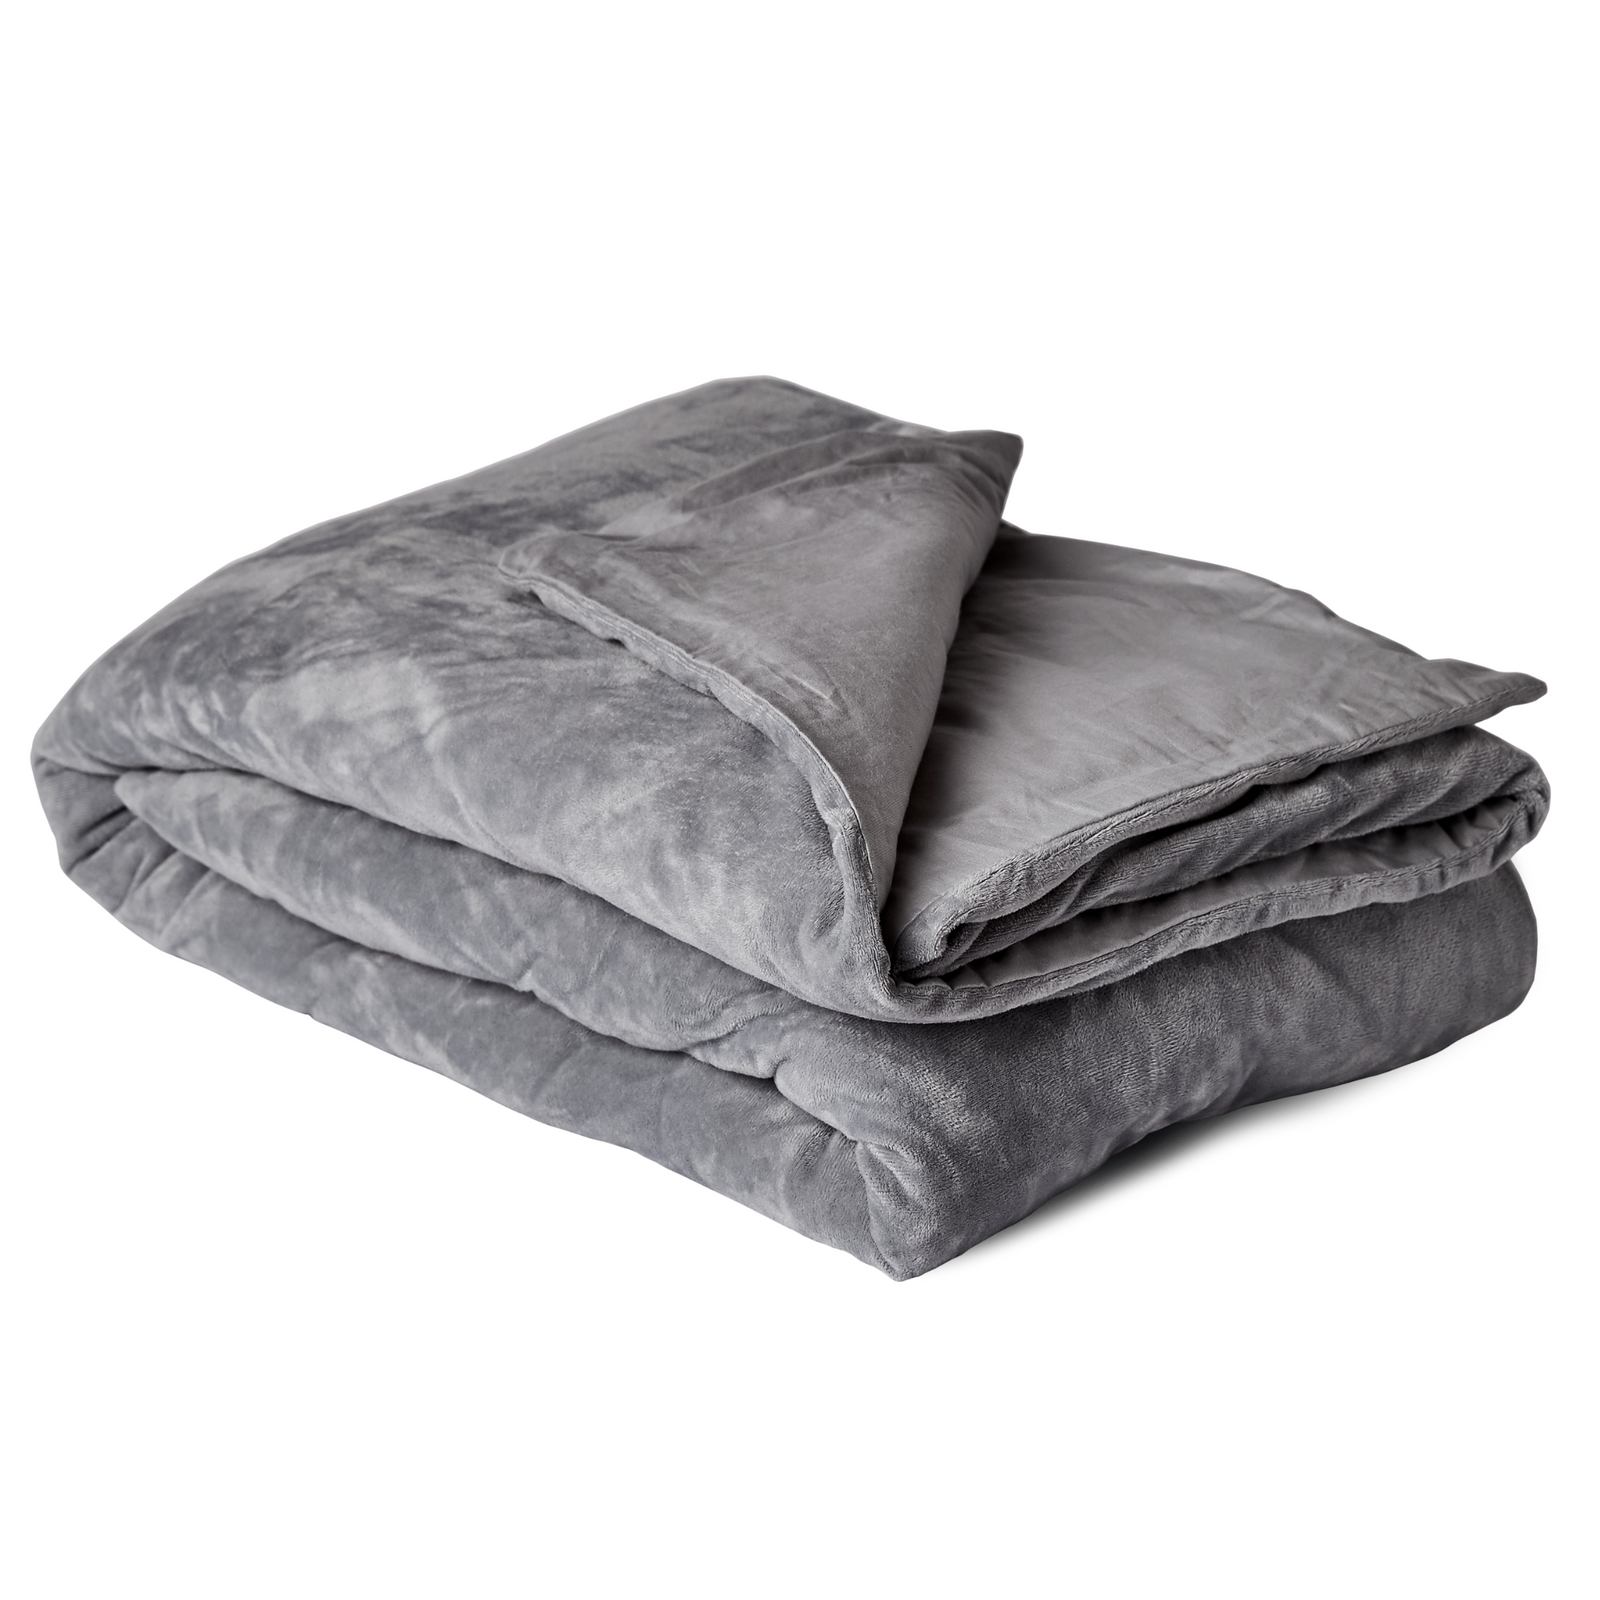 Dreampad Weighted Blankets: Sleep Better and De-Stress with Comfort